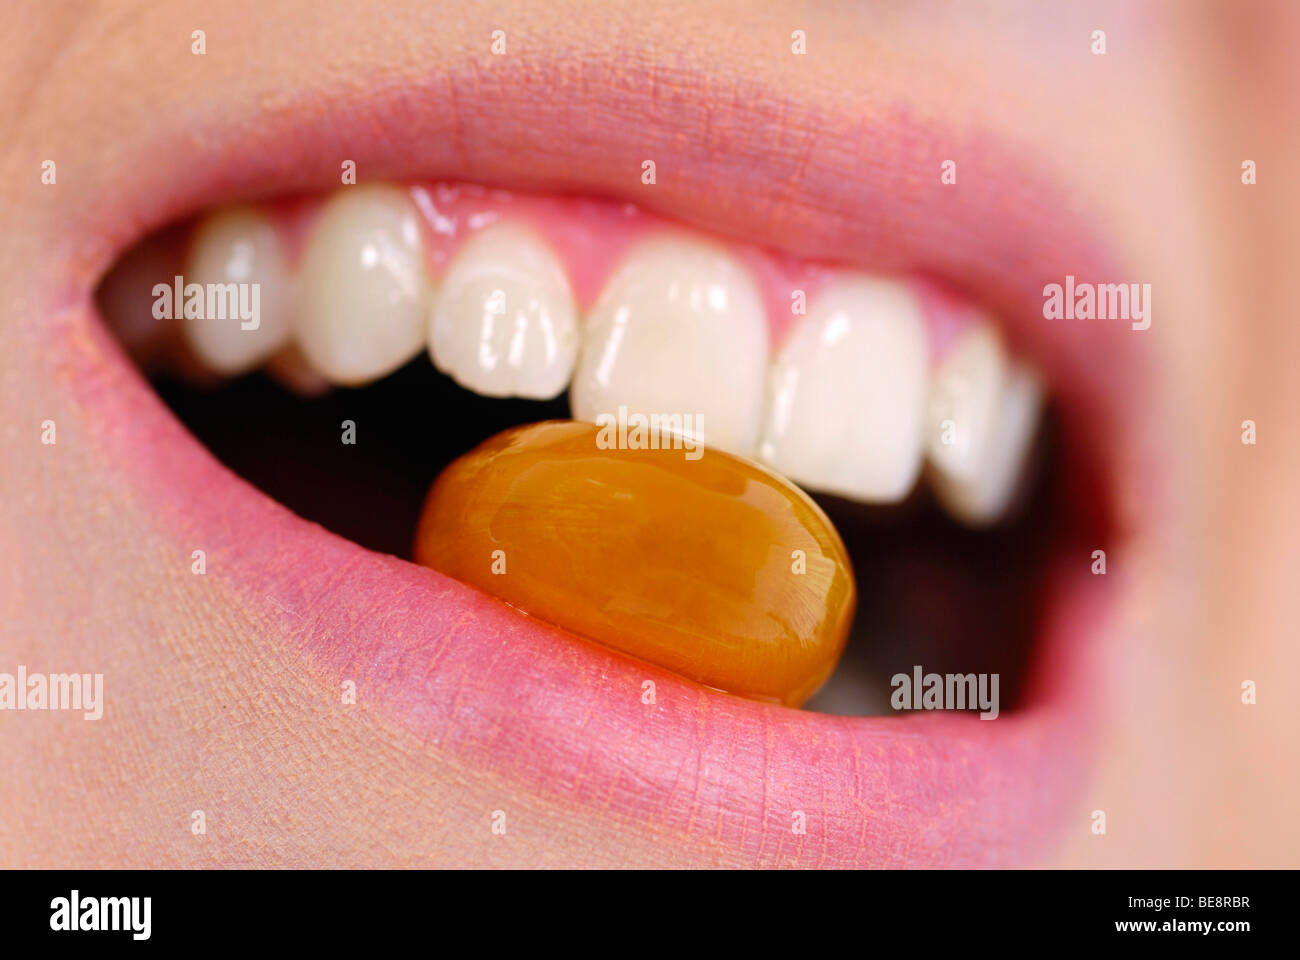 Mouth with teeth biting a bonbon Stock Photo